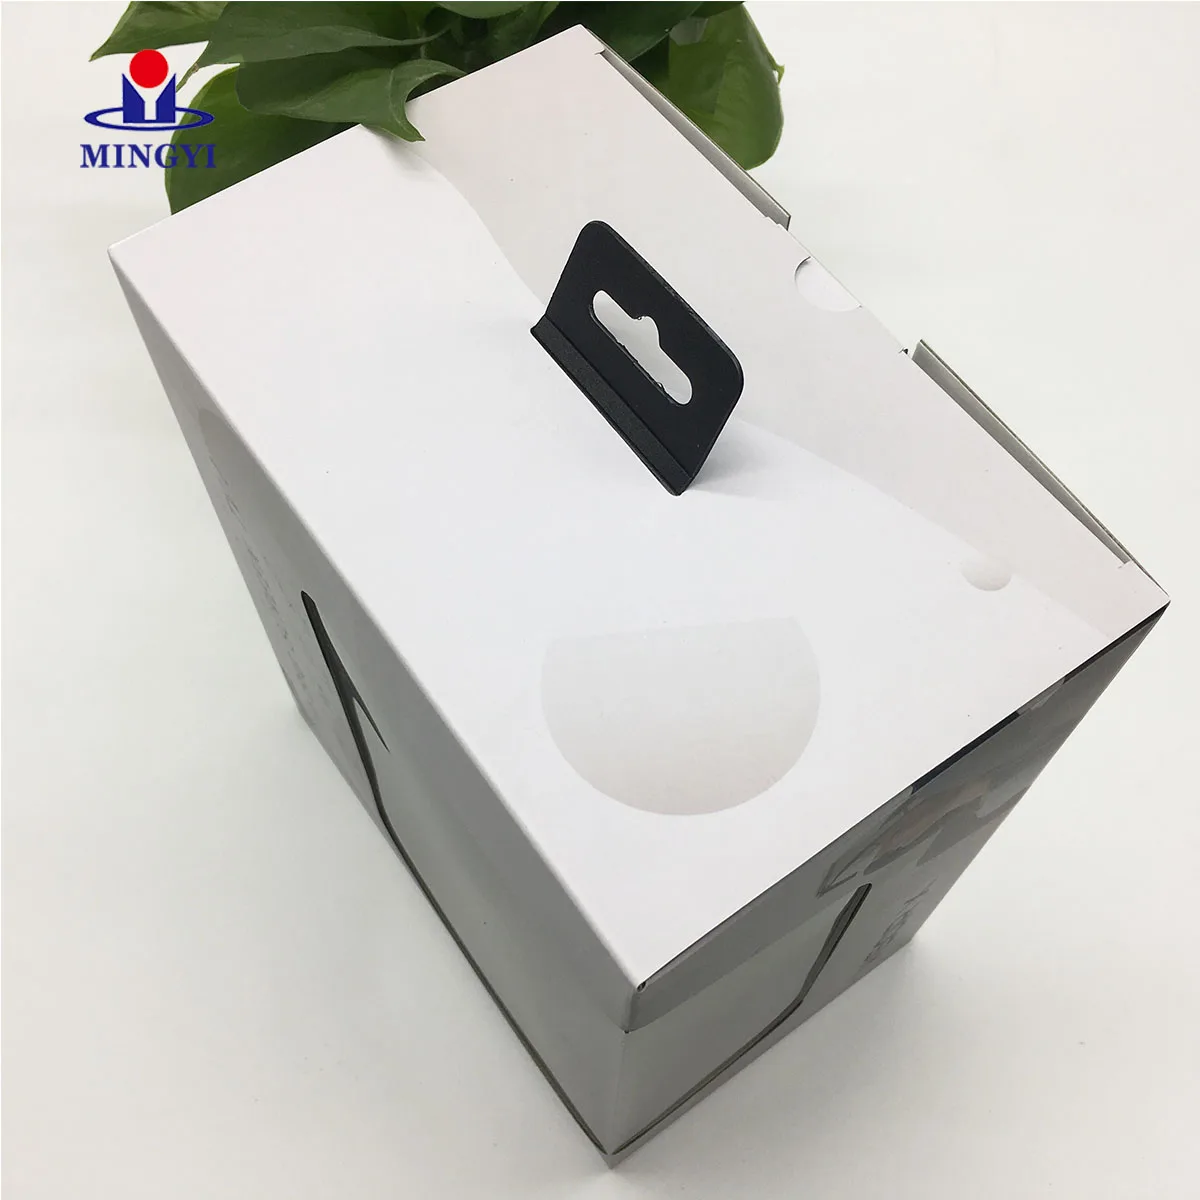 Kraft Box Craft Gift Recycled for Flower Corrugated Black Luxury with Window Carton Manufacturer with Handle Cake Paper Boxes